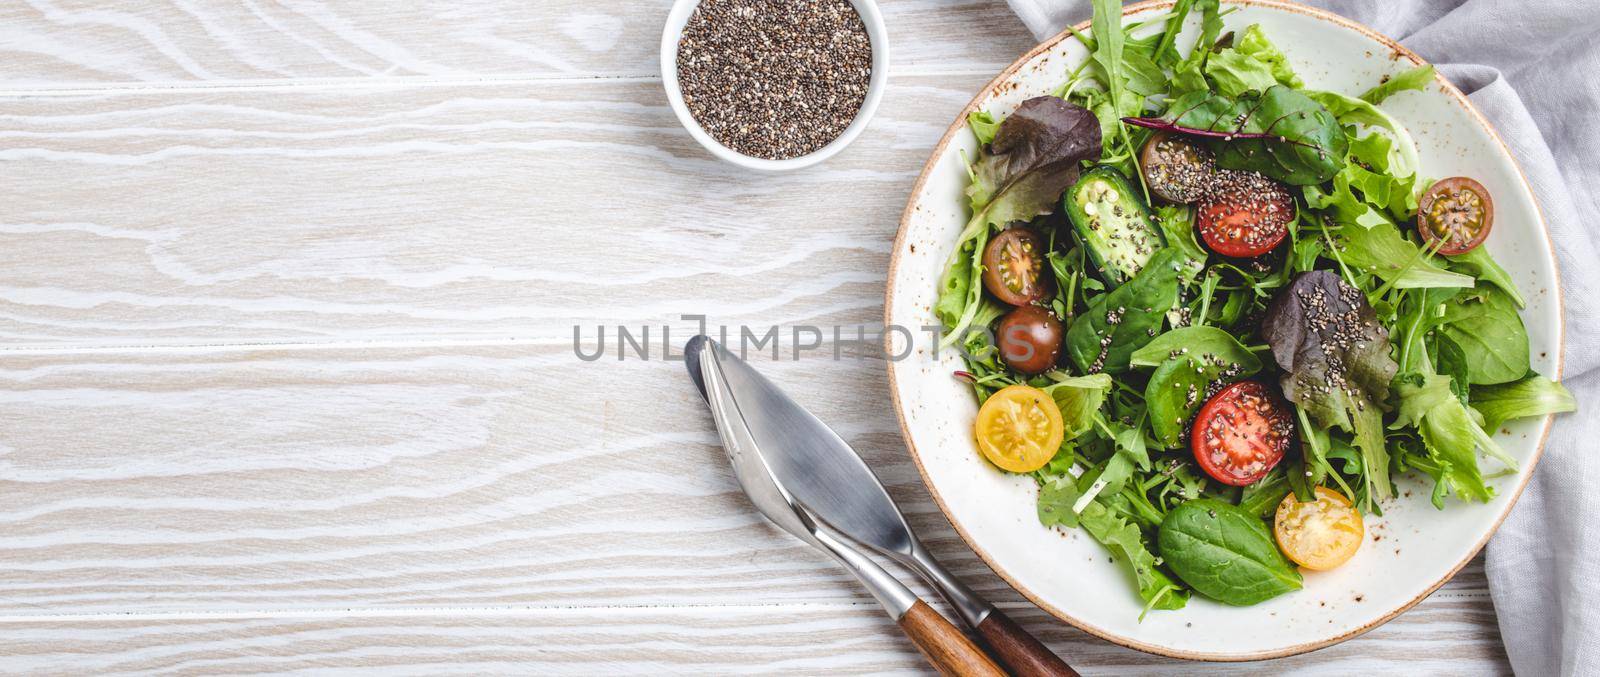 Vegetables vegetarian healthy salad with red yellow cherry tomatoes, green leafs and chia seeds on white plate on white wooden rustic background top view, healthy food and diet concept, space for text